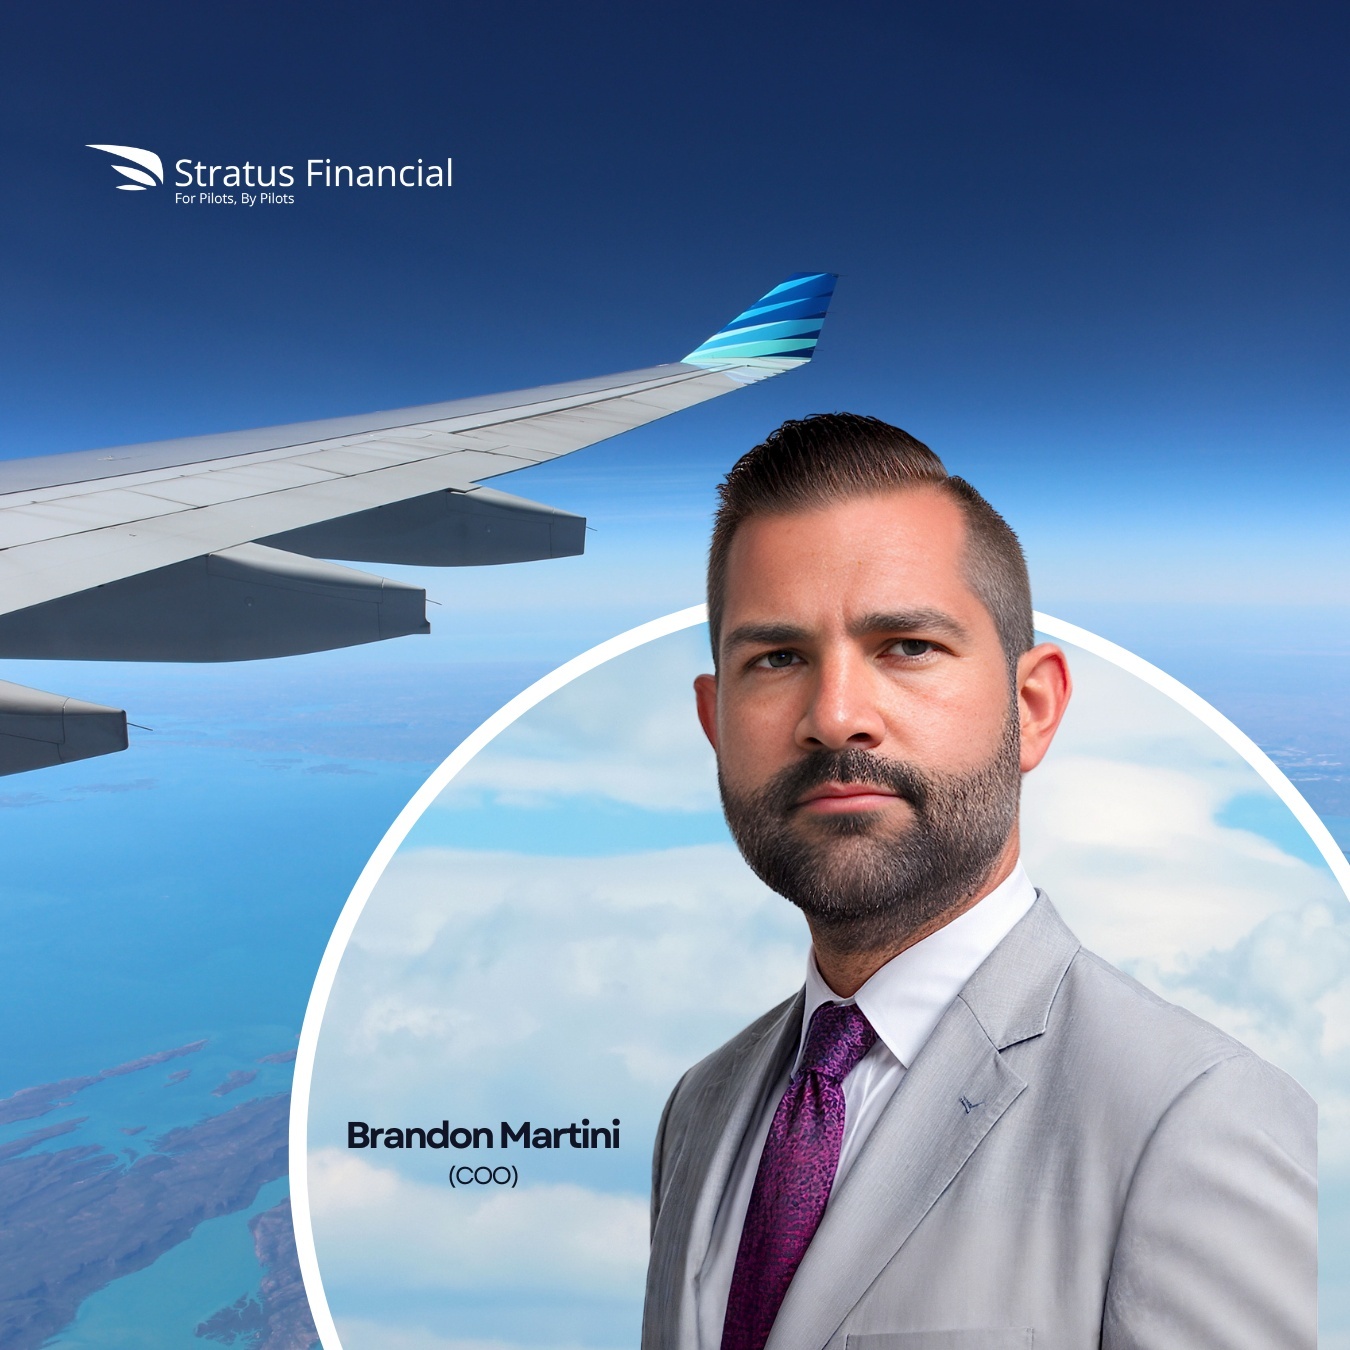 Meet Brandon Martini, the COO at Stratus Financial. Discover his journey from flight school owner to financial innovator.